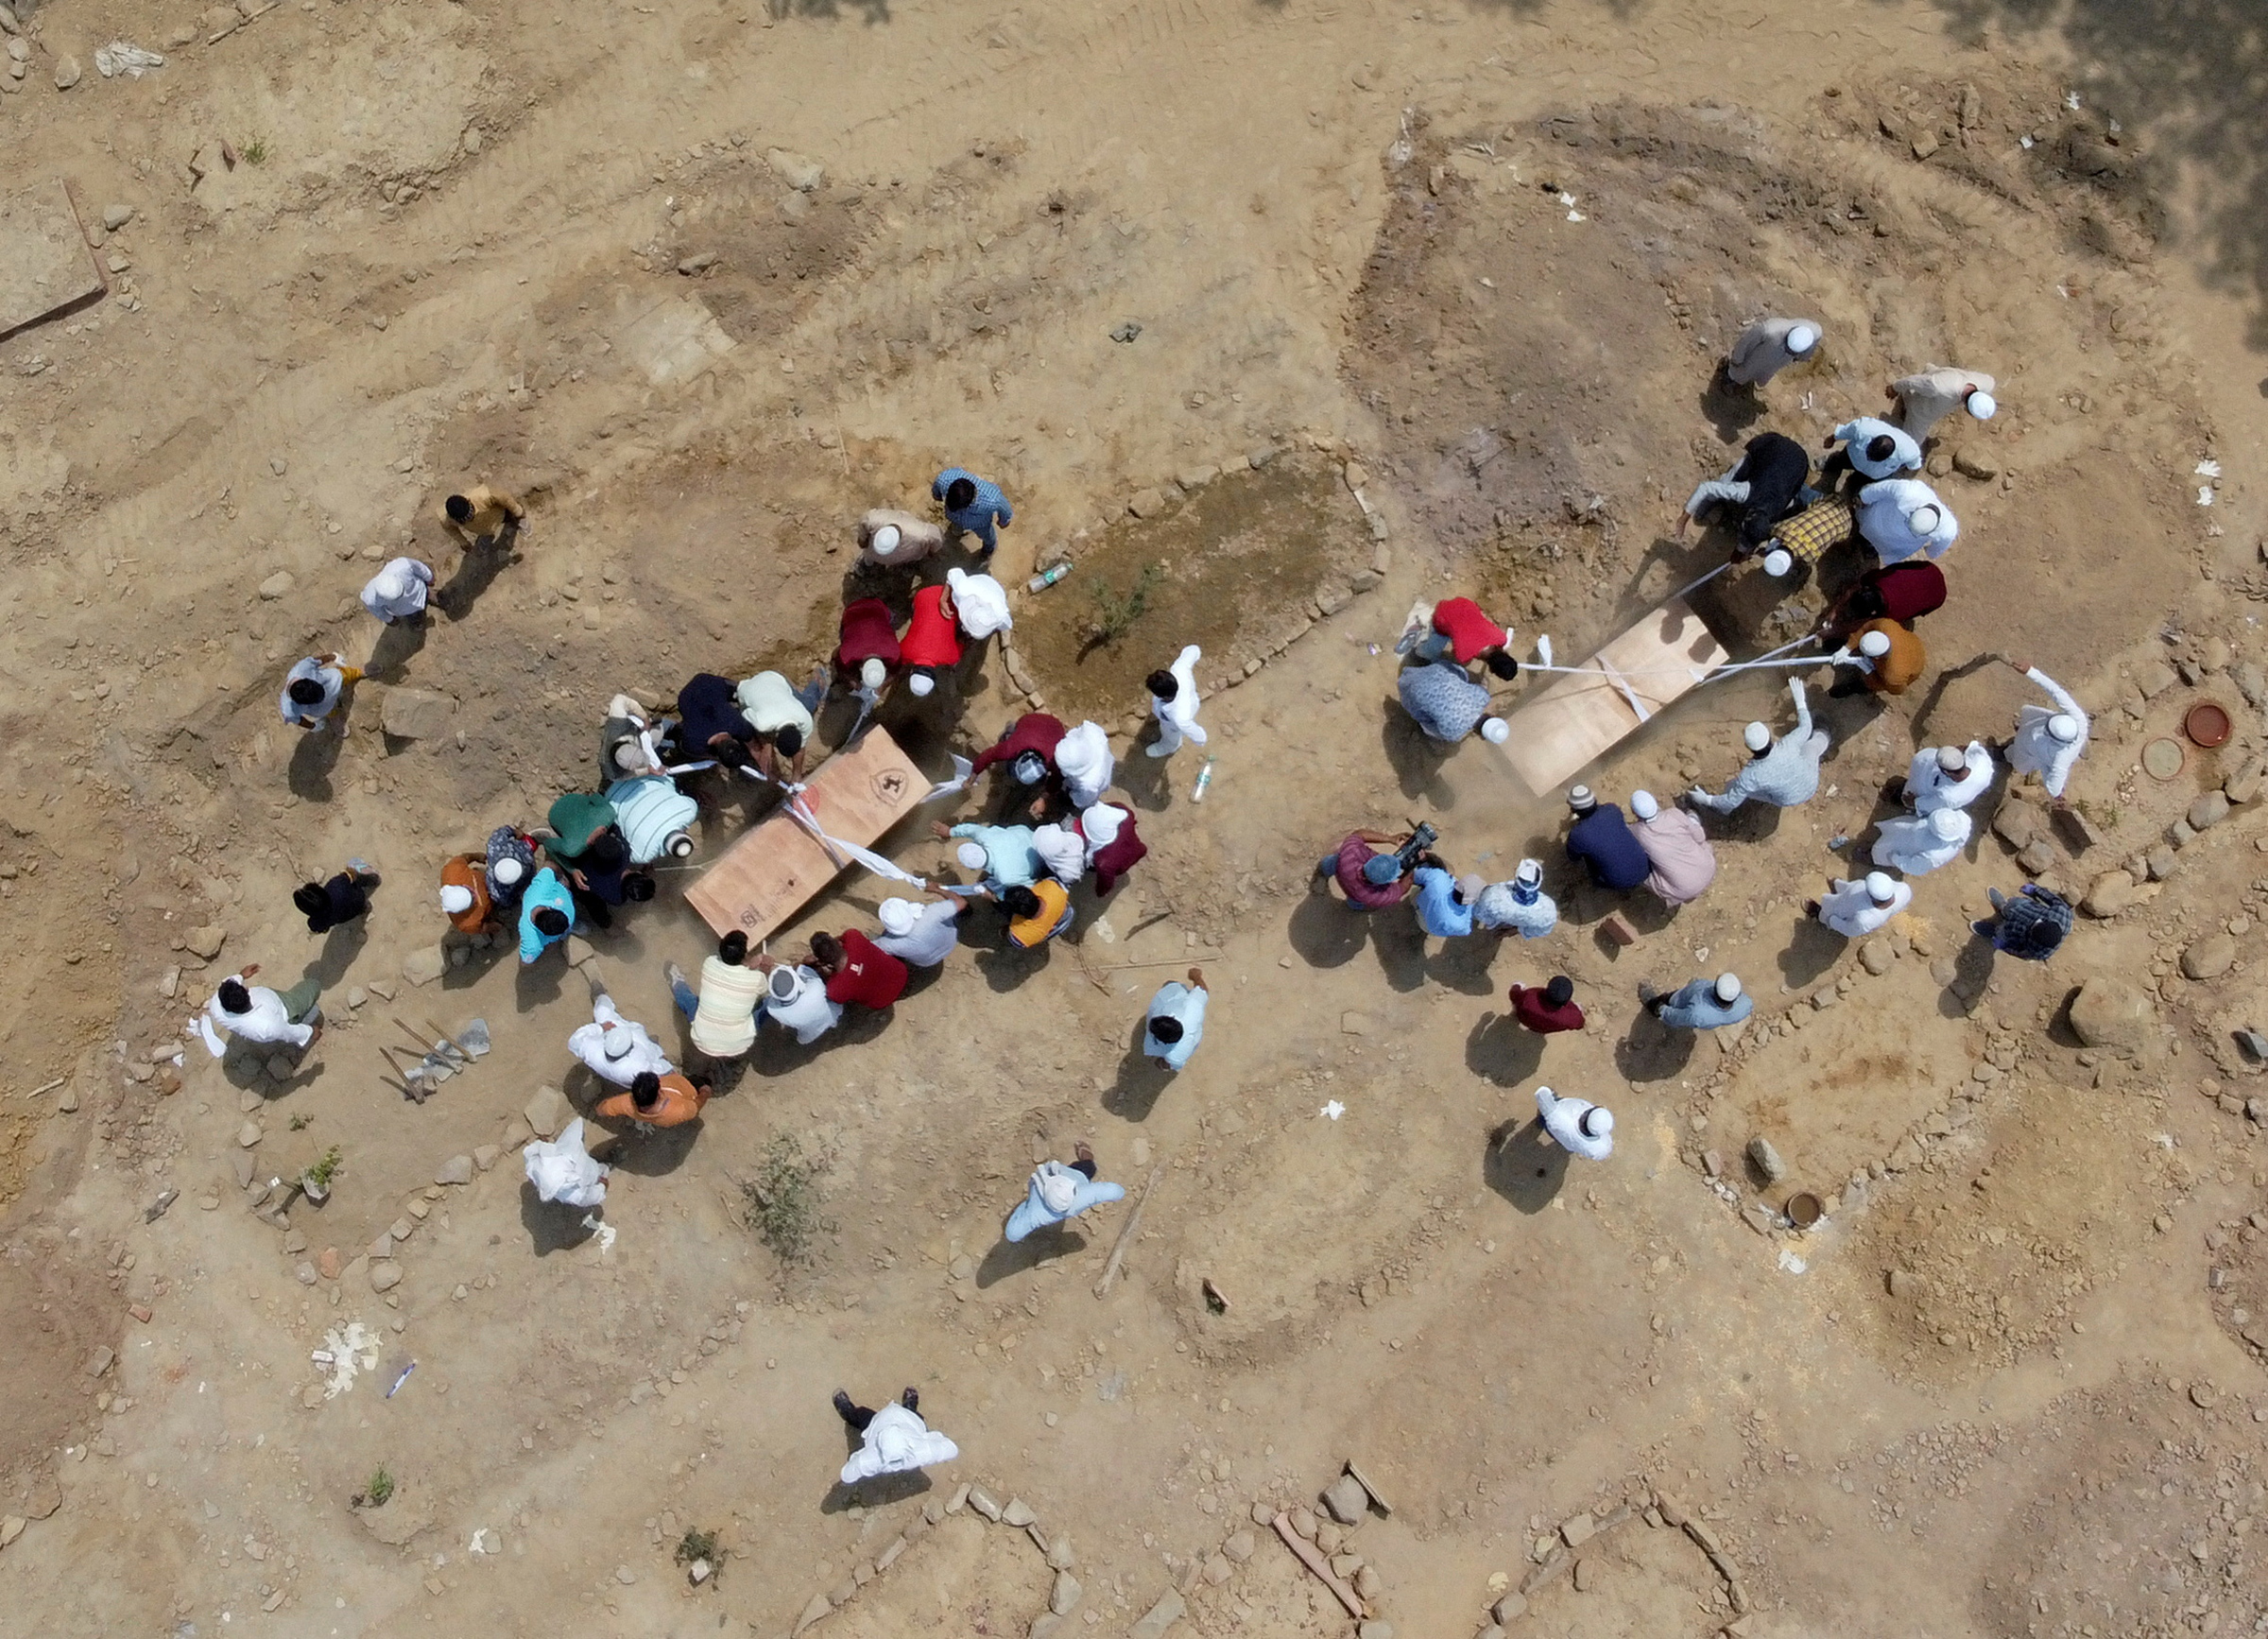 People bury the bodies of COVID-19 victims at a graveyard in New Delhi on April 16, 2021.